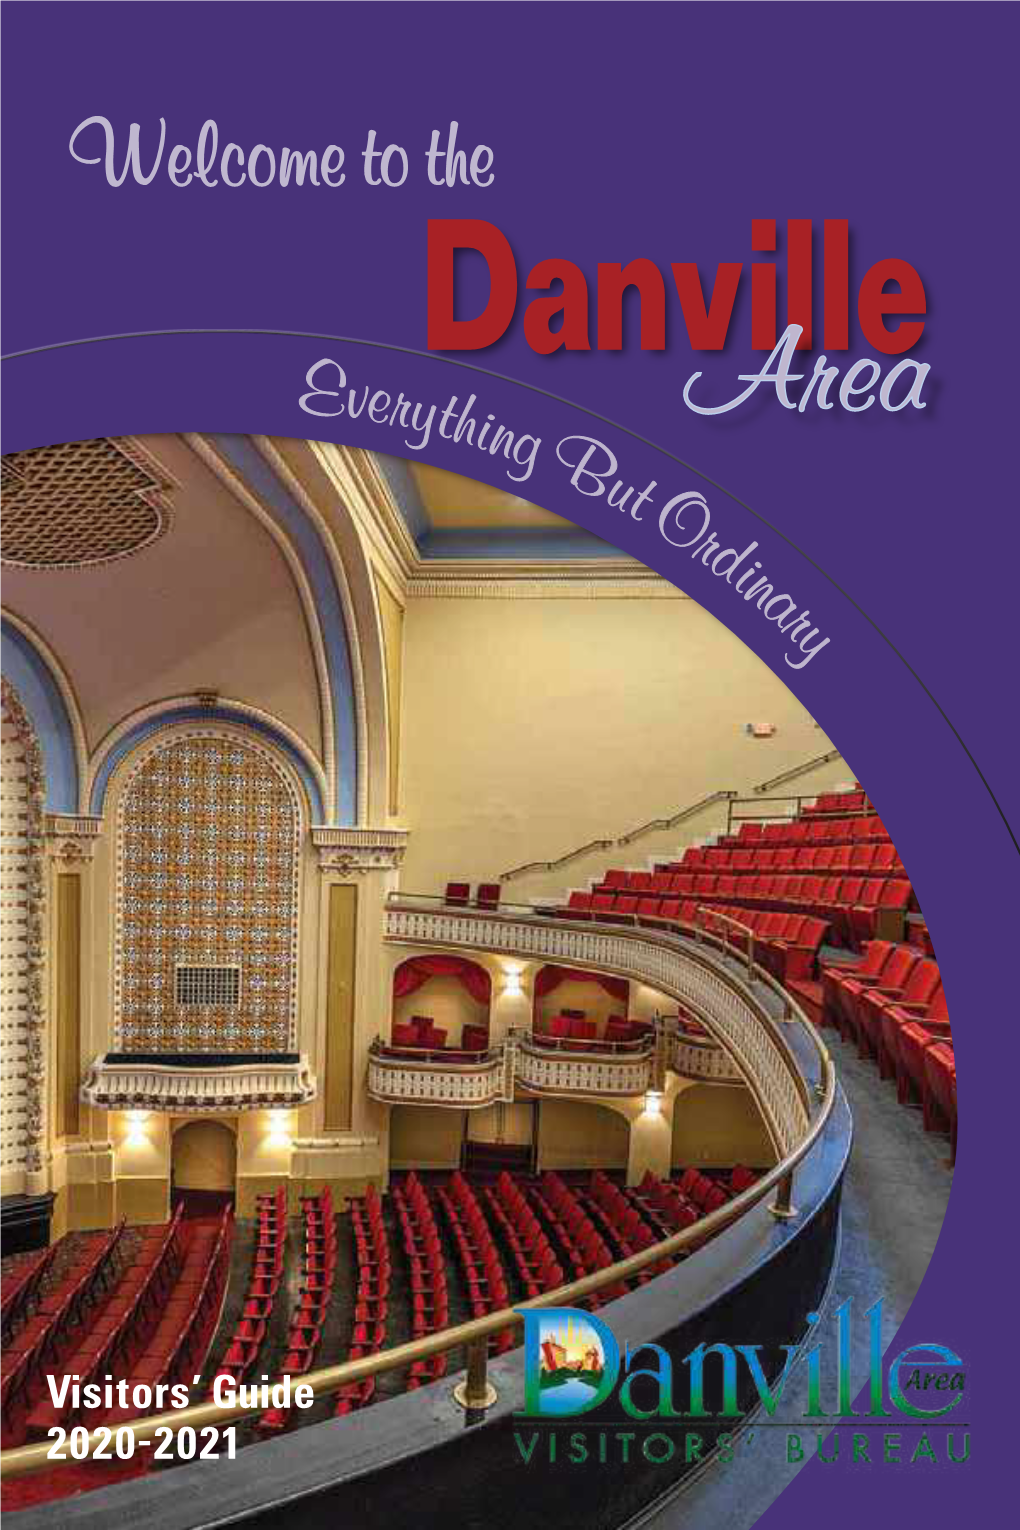 Visitors' Guide 2020-2021 Welcome to the Danville Area